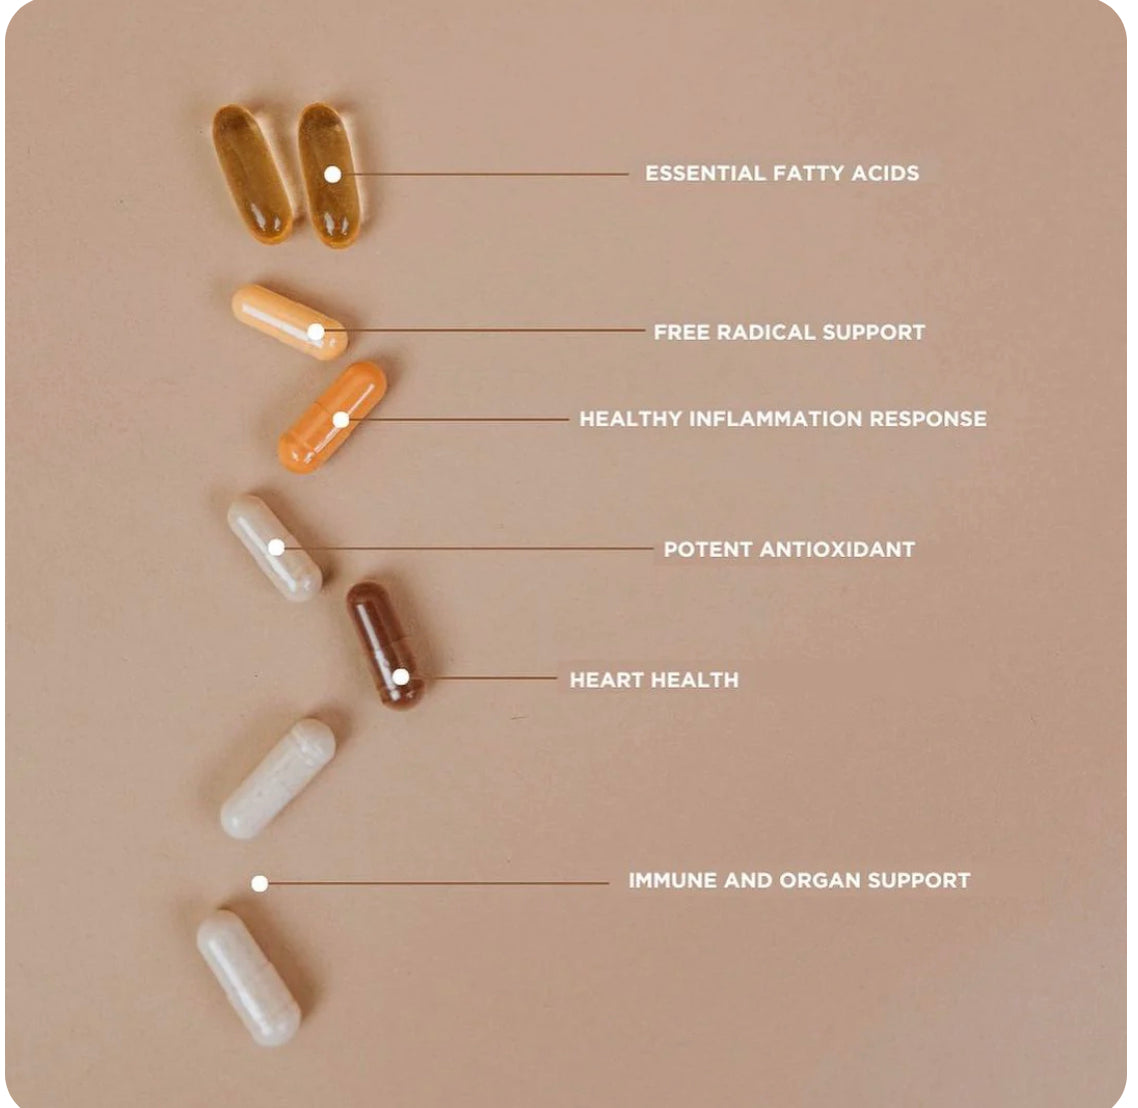 REVIVE Essential Vitamins Pack
All in One Health Formula